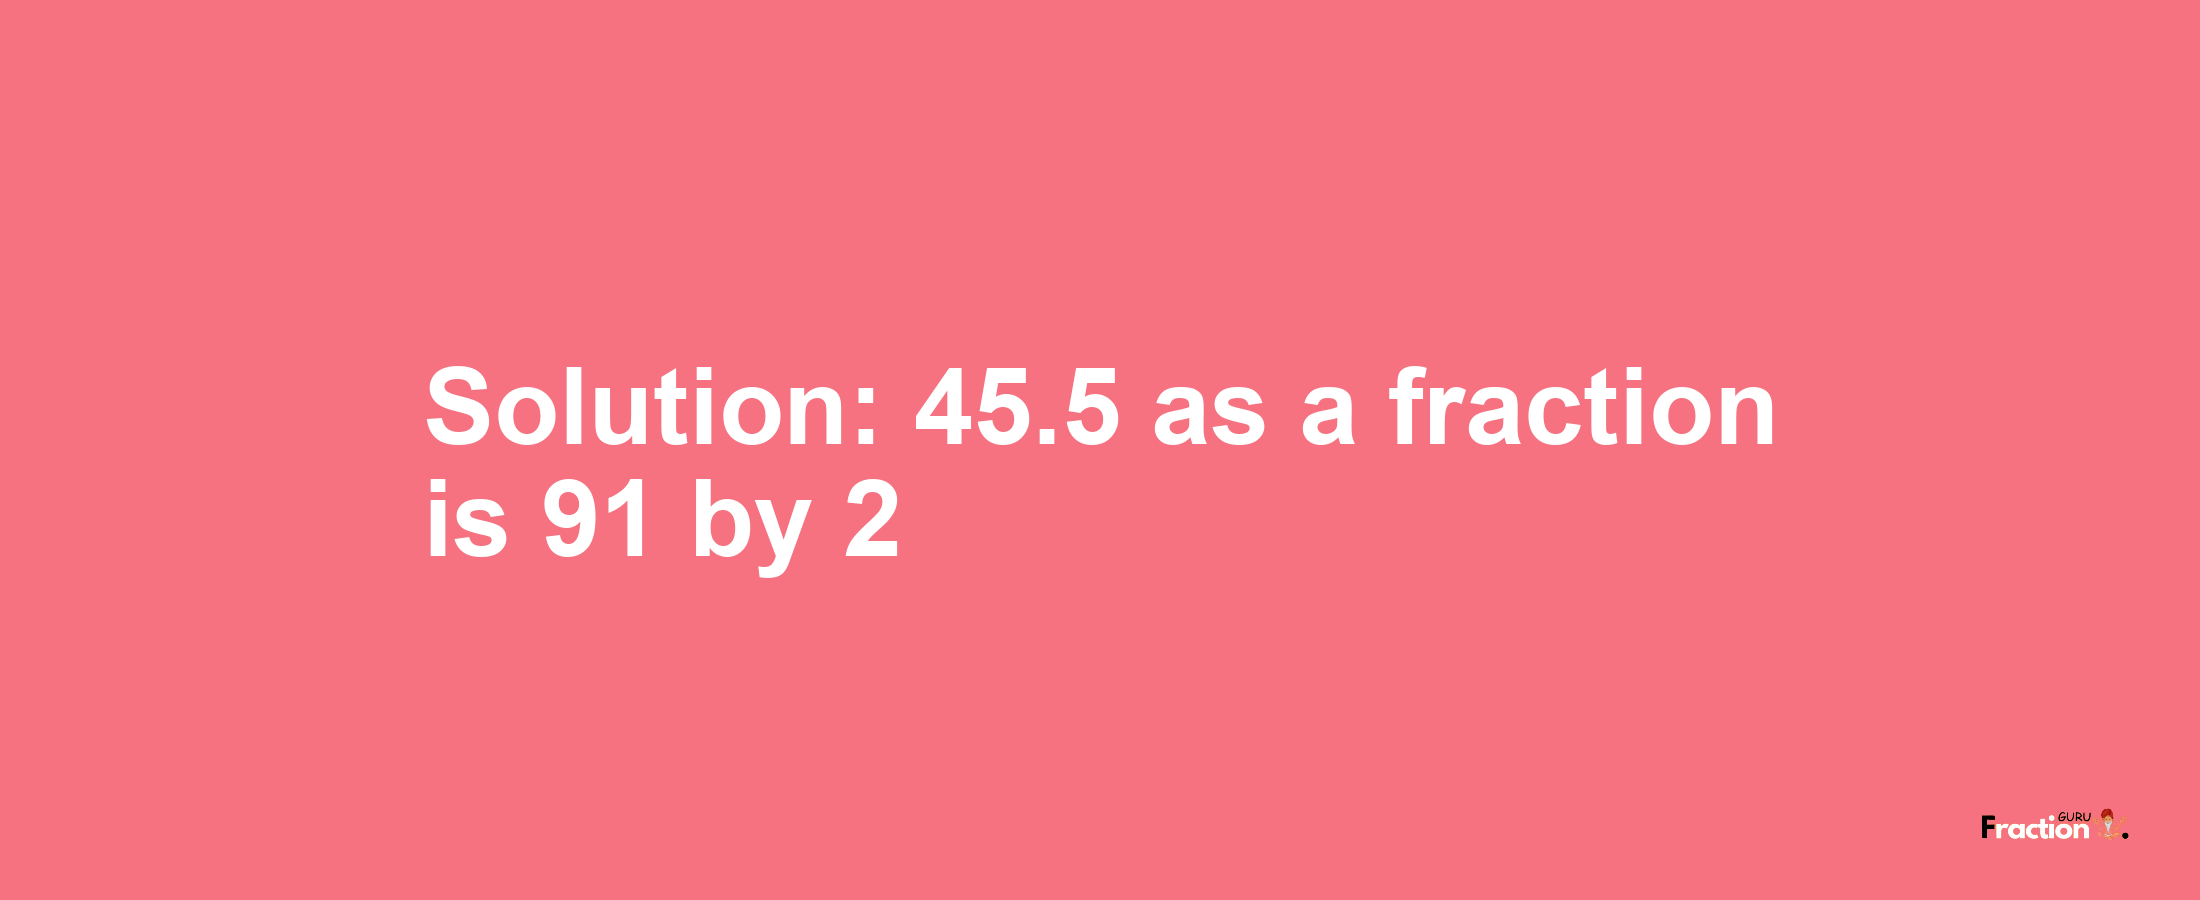 Solution:45.5 as a fraction is 91/2